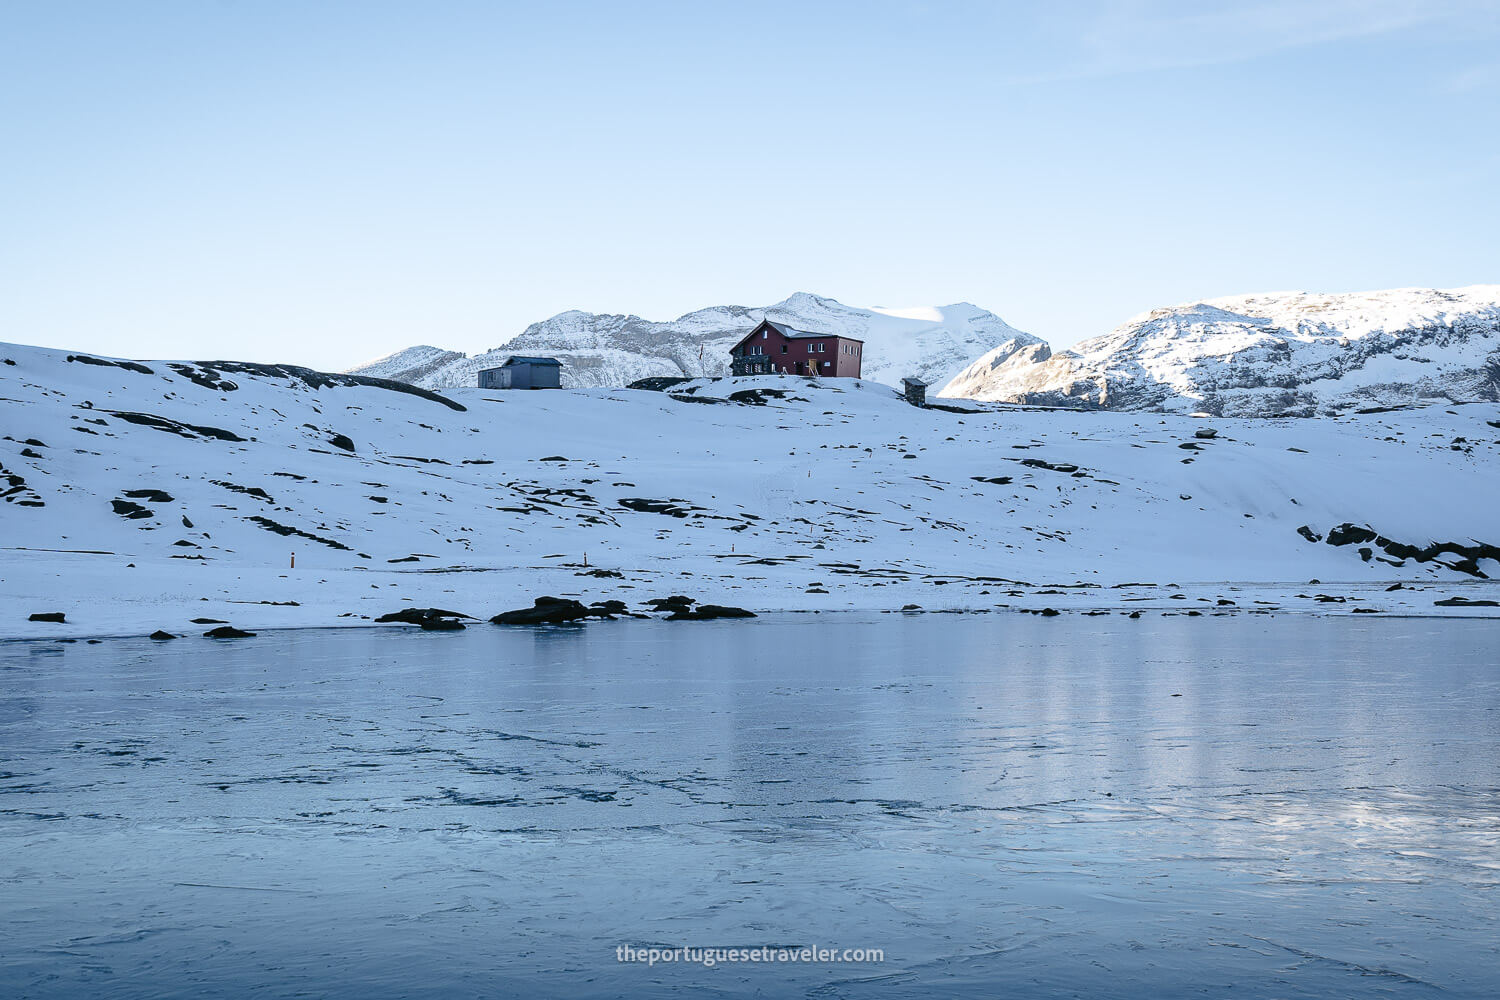 The Muttsee Hut over a frozen lake